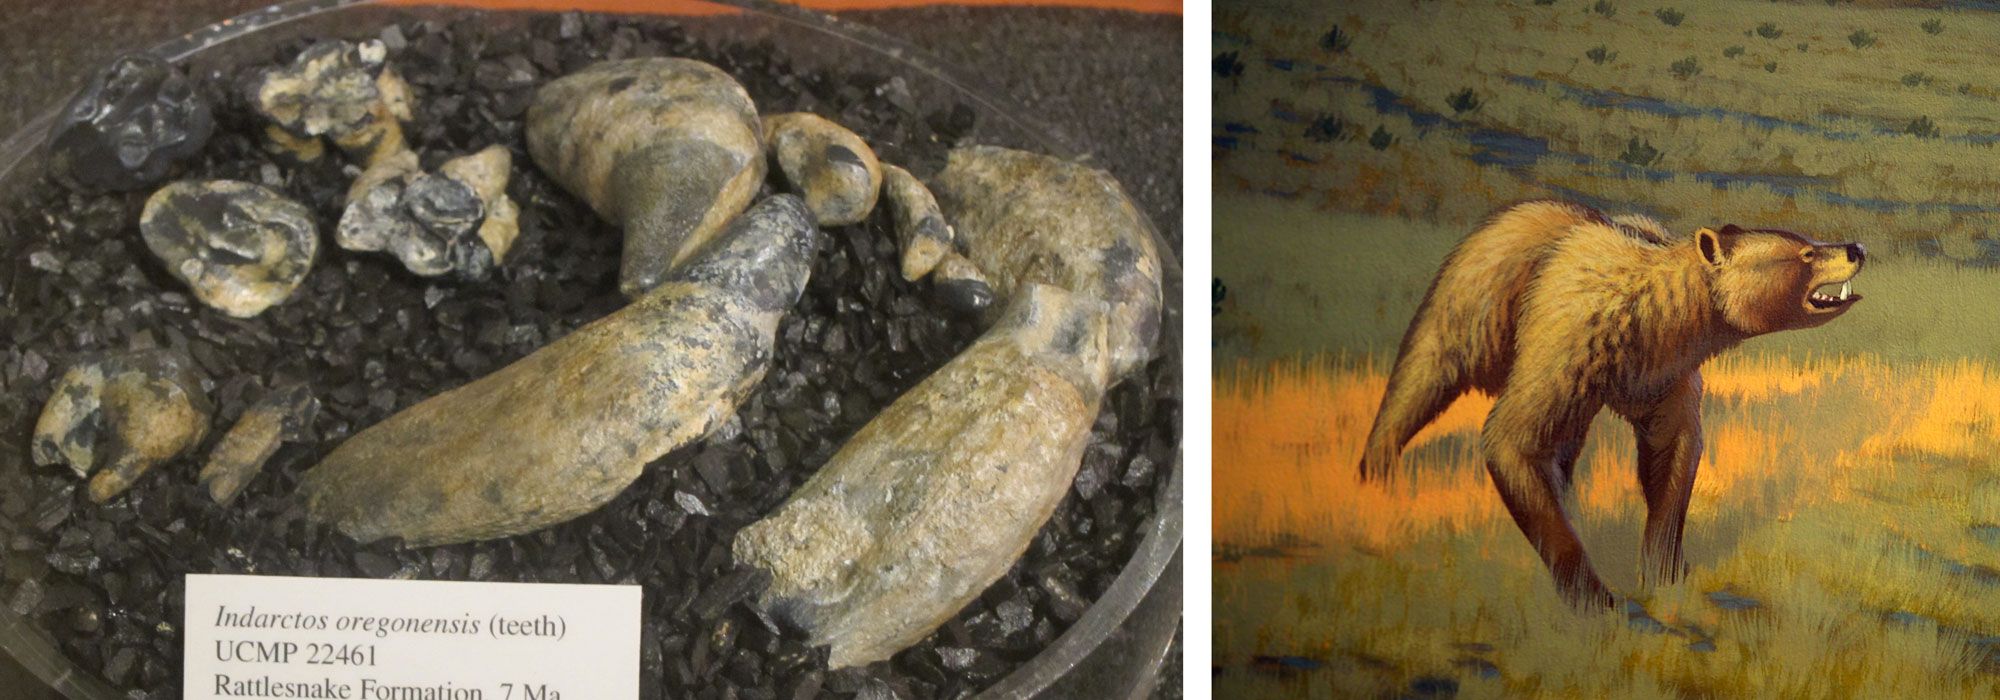 2-panel figure of the short-faced bear from the Miocene Rattlesnake Formation. Panel 1: Photograph of fossil teeth in a tray of gravel. The teeth appear to include canines and molars. Panel 2: Detail of a mural showing a short-faced bear as it may have appeared in life. The bear has long legs and is standing in a grassy landscape.